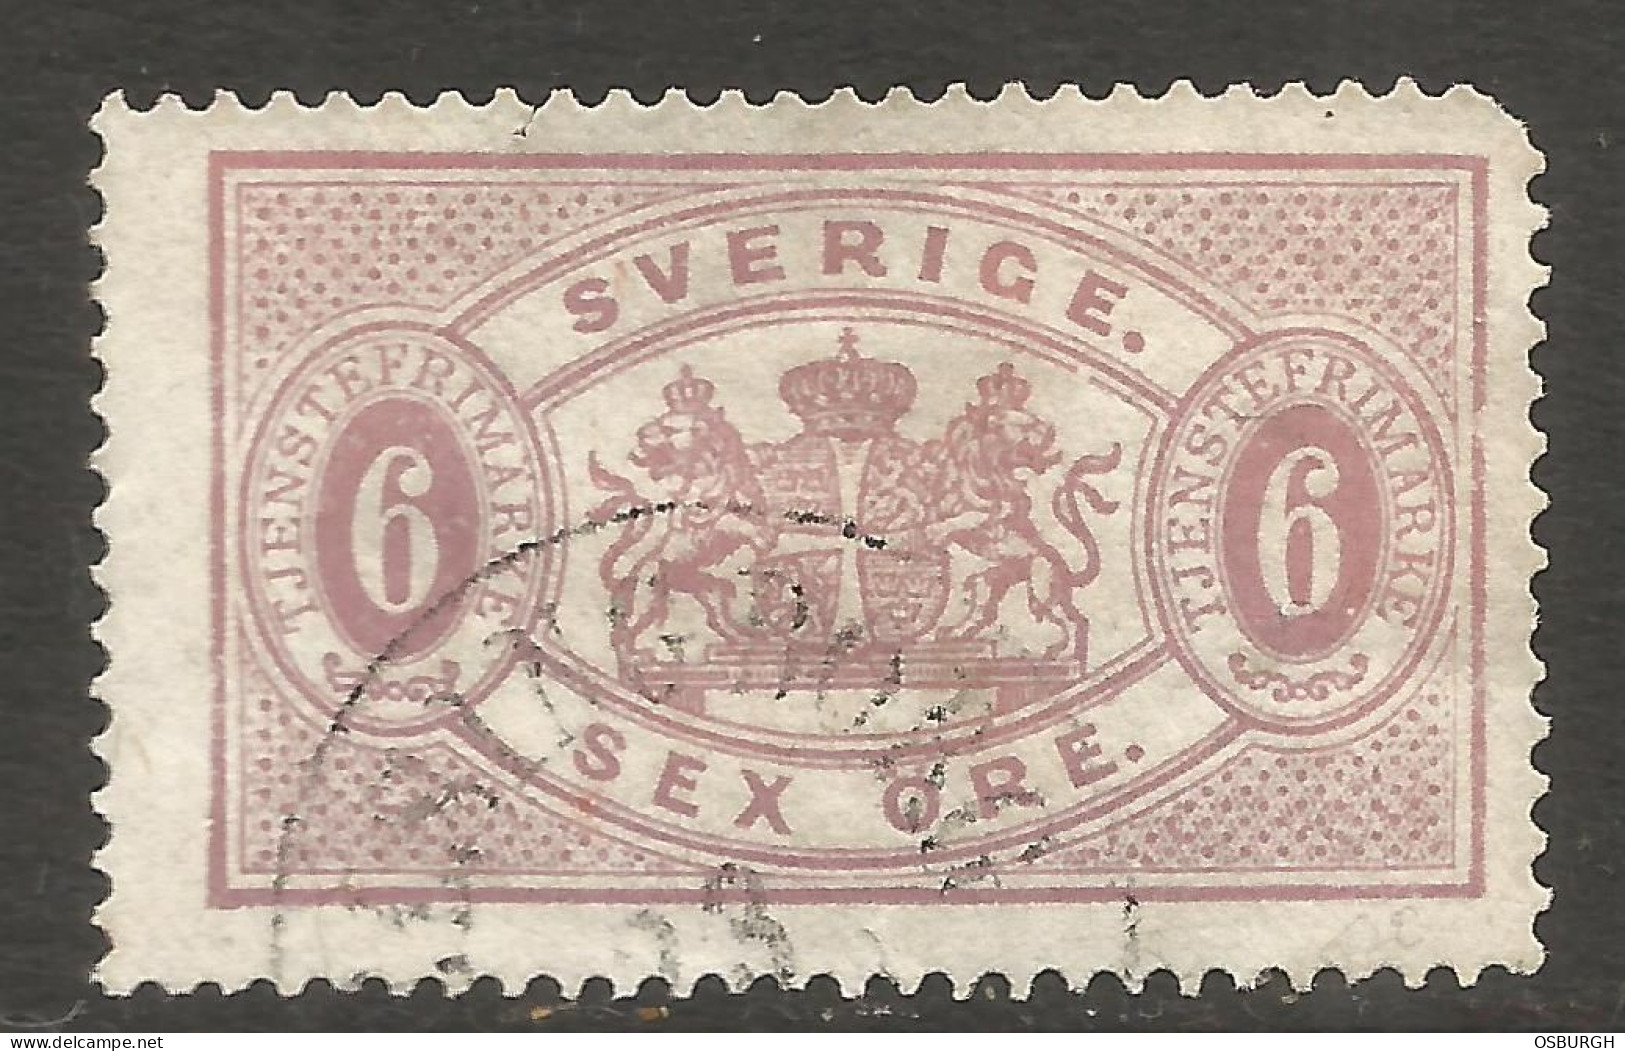 SWEDEN. OFFICIAL. 6o USED HELSINGBORG POSTMARK. - Oficiales